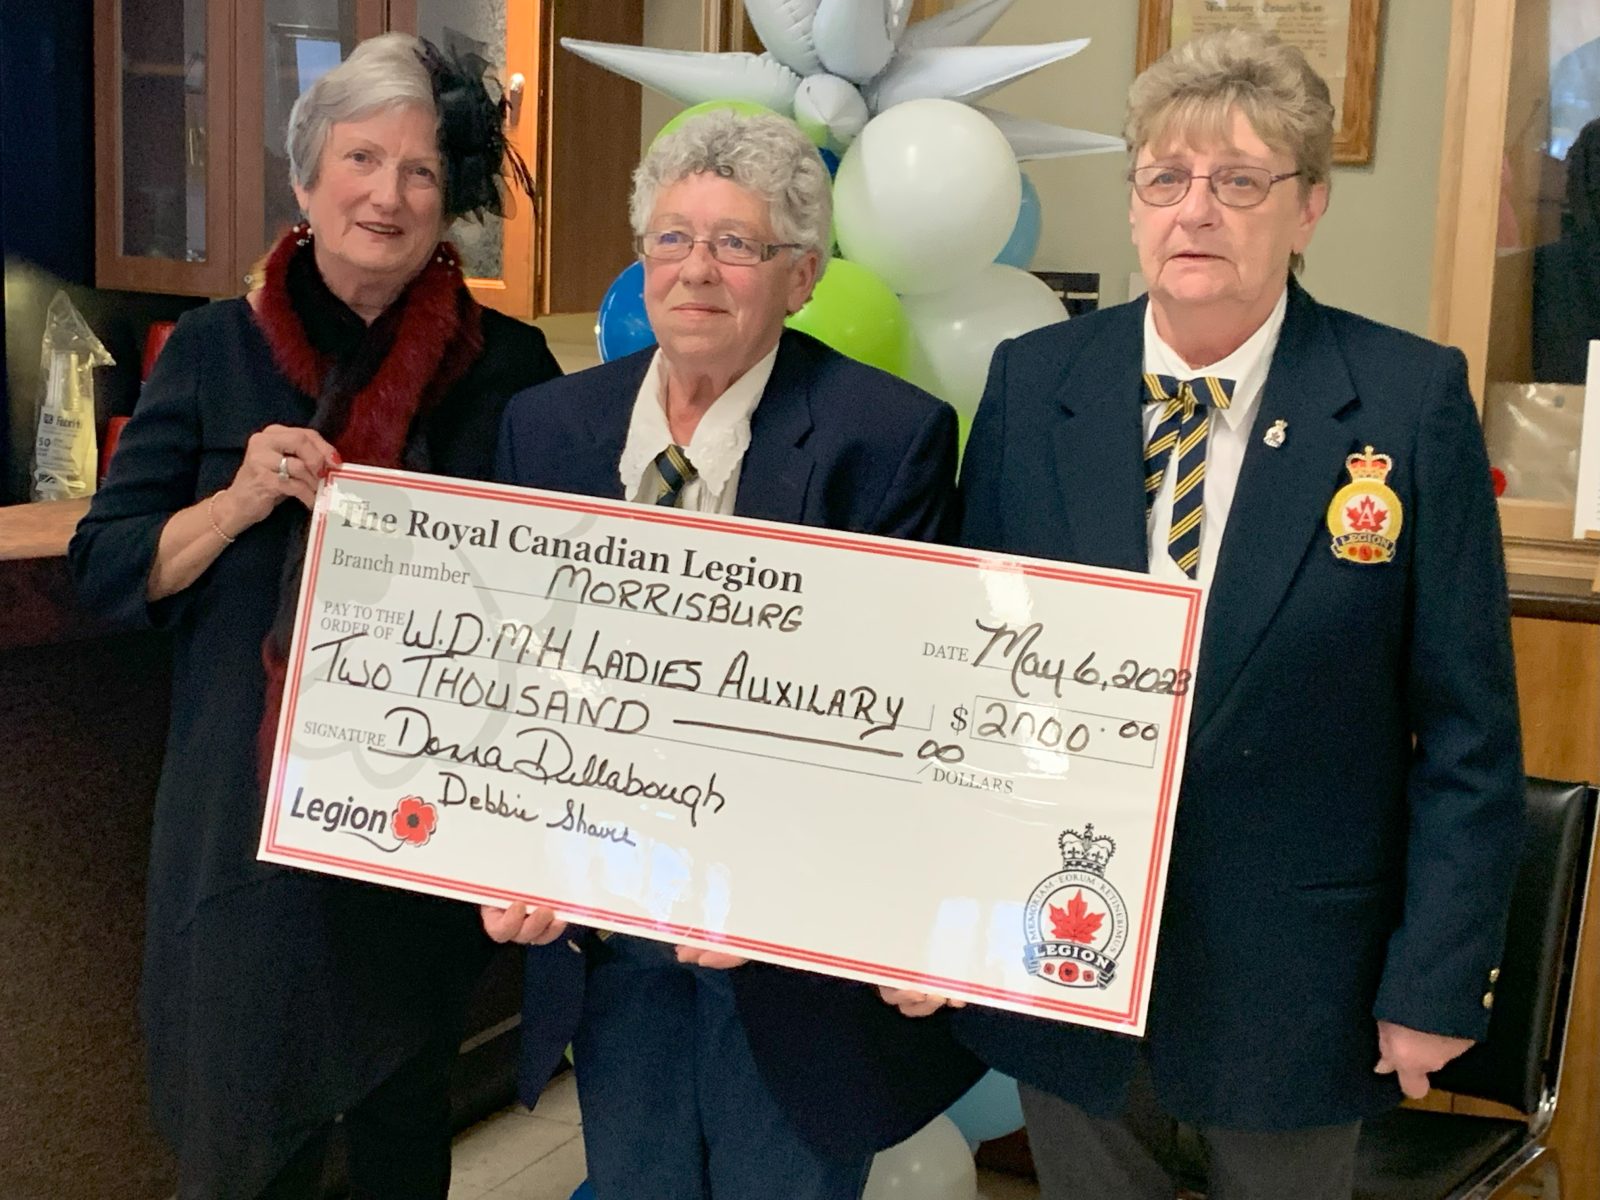 Morrisburg Legion and Women’s Auxiliary Supports WDMH Auxiliary with $2,000 Donation